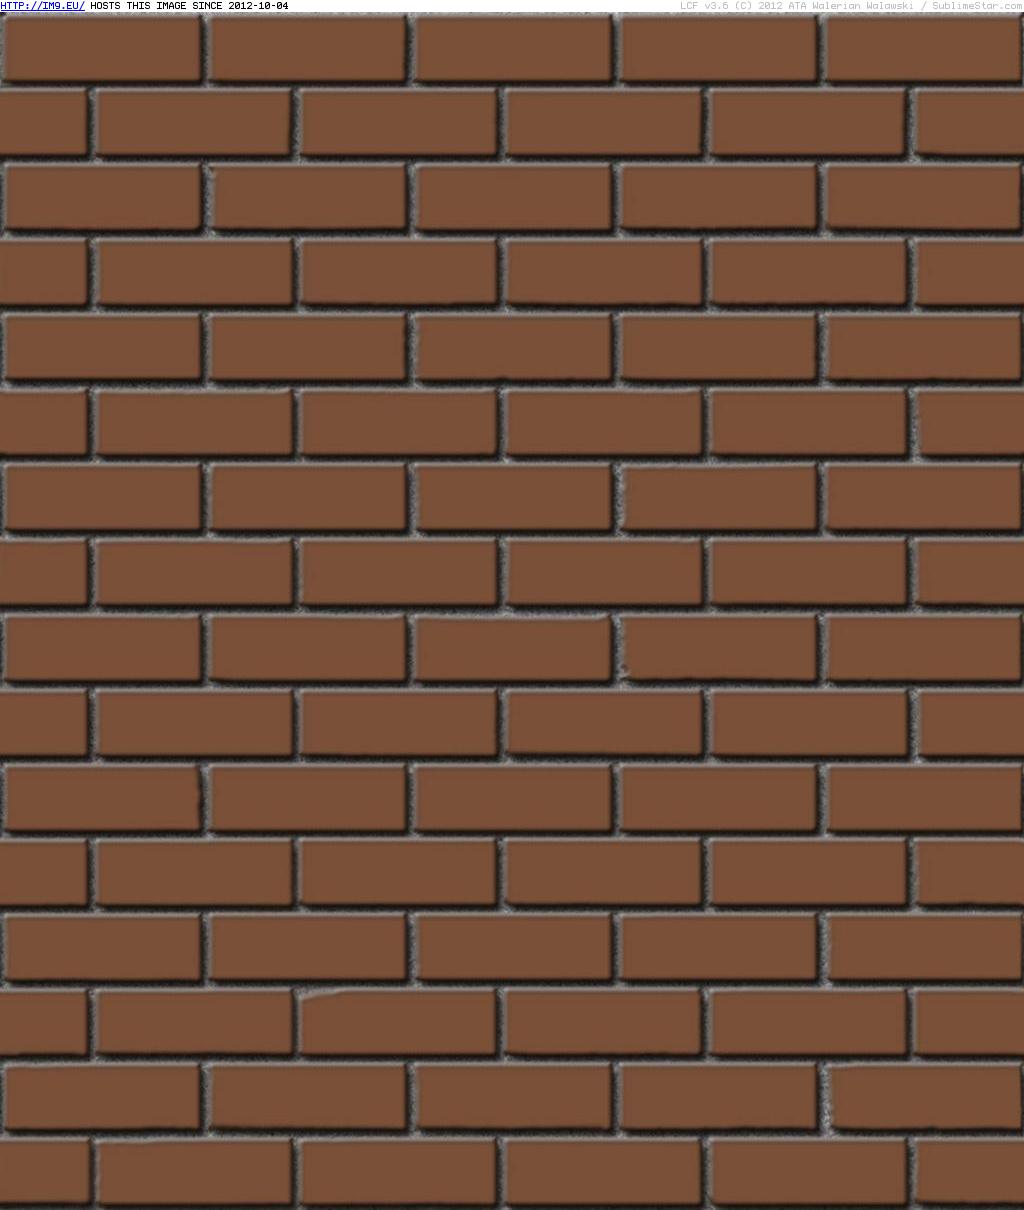 Brick wall texture 3 (in Brick walls textures and wallpapers)